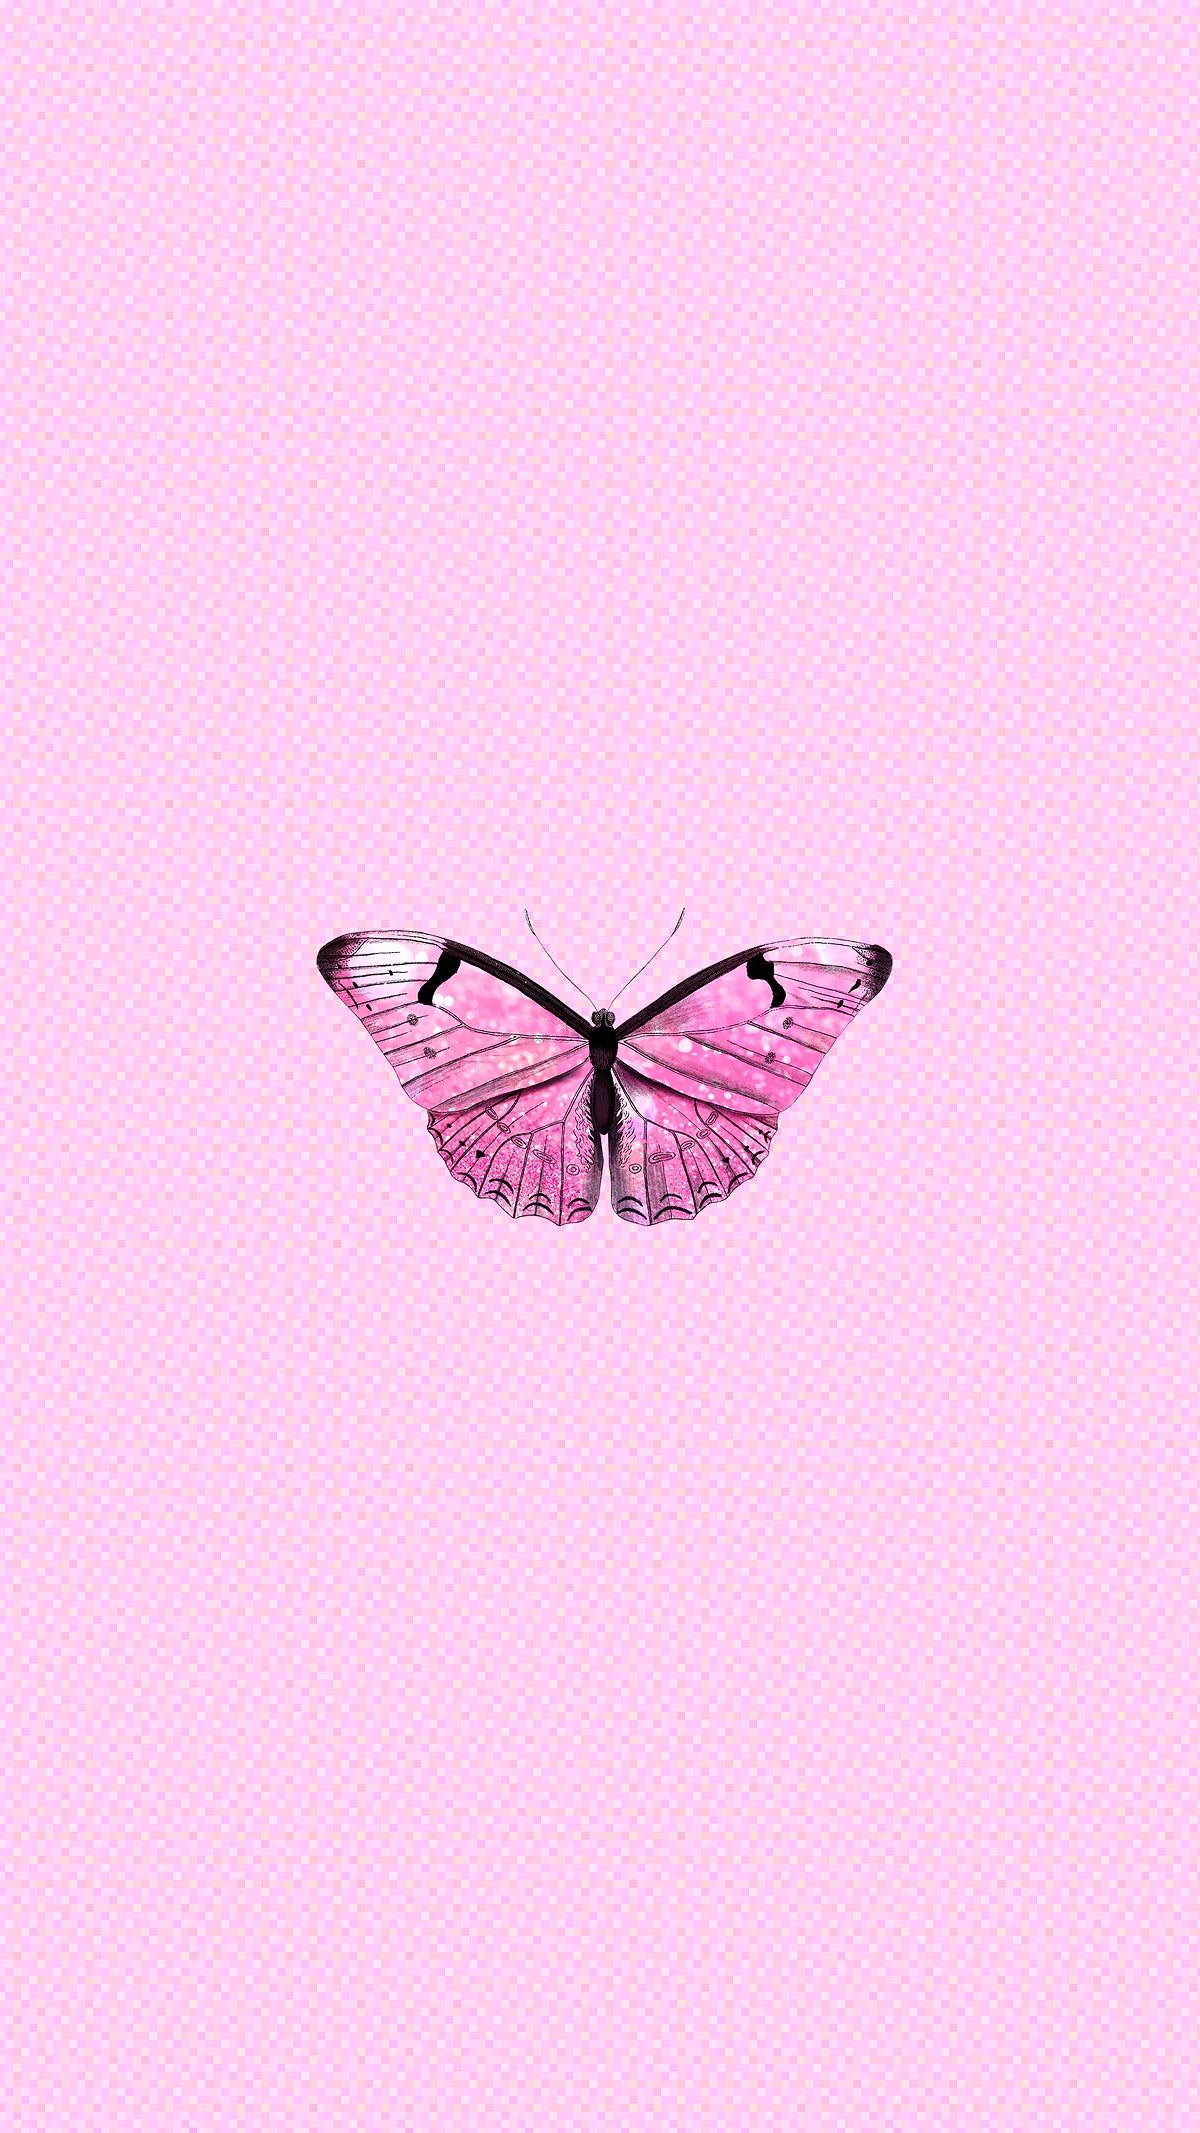 Pink butterfly on a holographic background  premium image by rawpixelcom   Techi  Butterfly wallpaper Butterfly wallpaper iphone Purple wallpaper  iphone